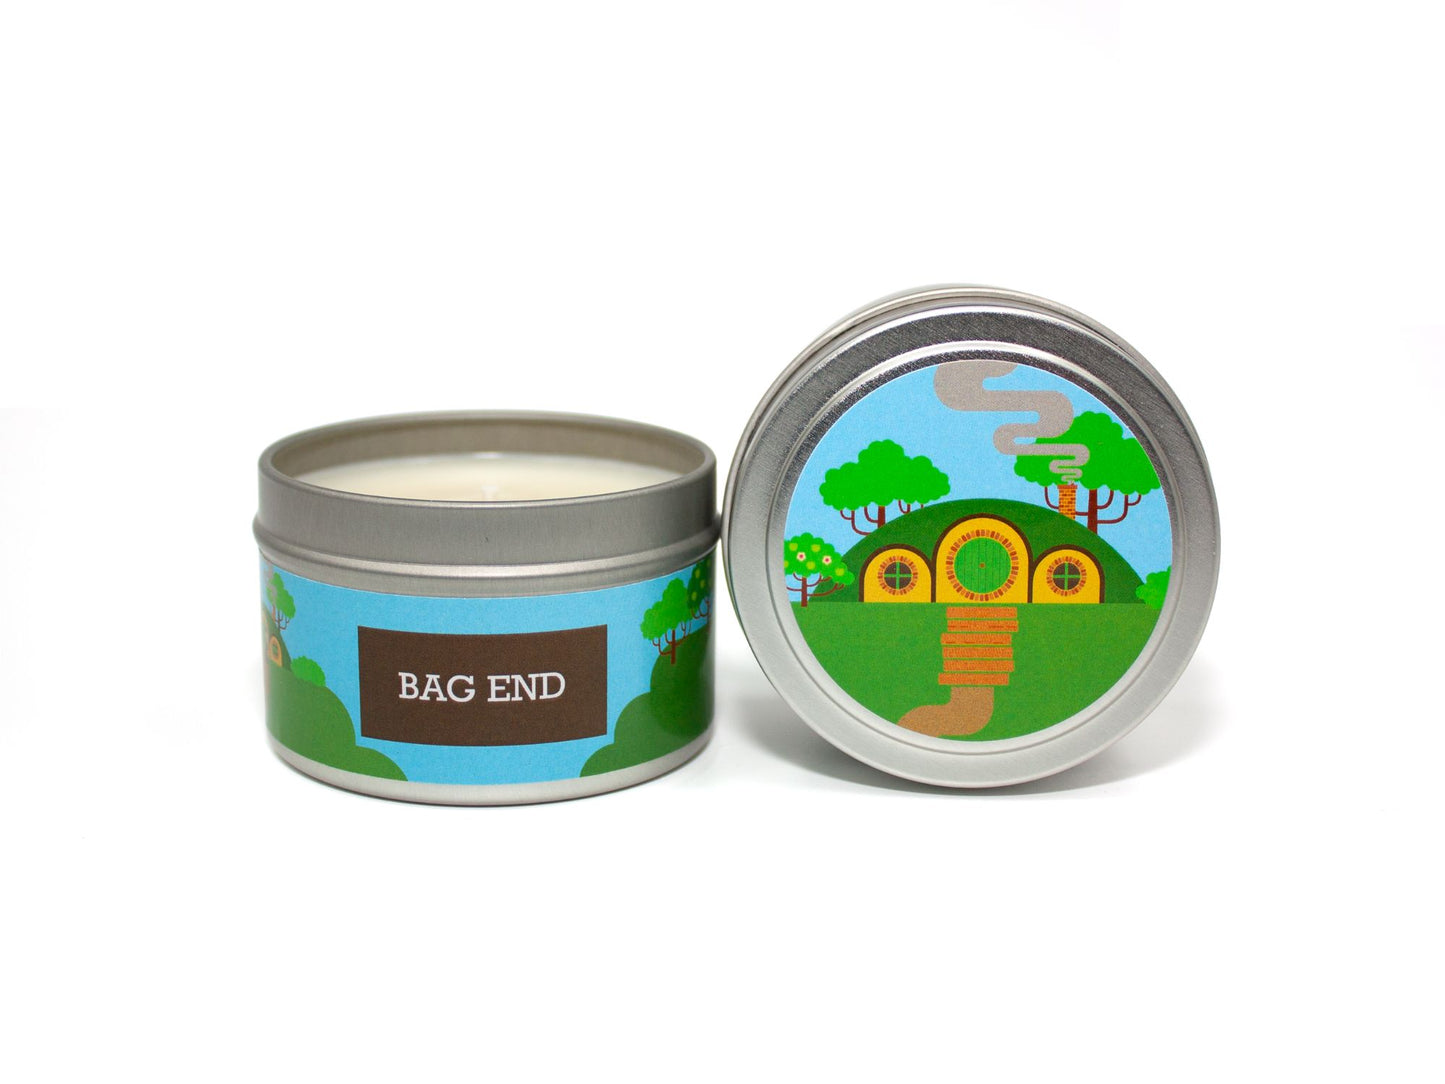 Onset & Rime apple tart scented candle called "Bag End" in a 4 oz silver tin. The circular label on top depicts Bilbo's cottage. The text on the front label is "Bag End - Baked Apple, Cinnamon, Brown Sugar Streusel".